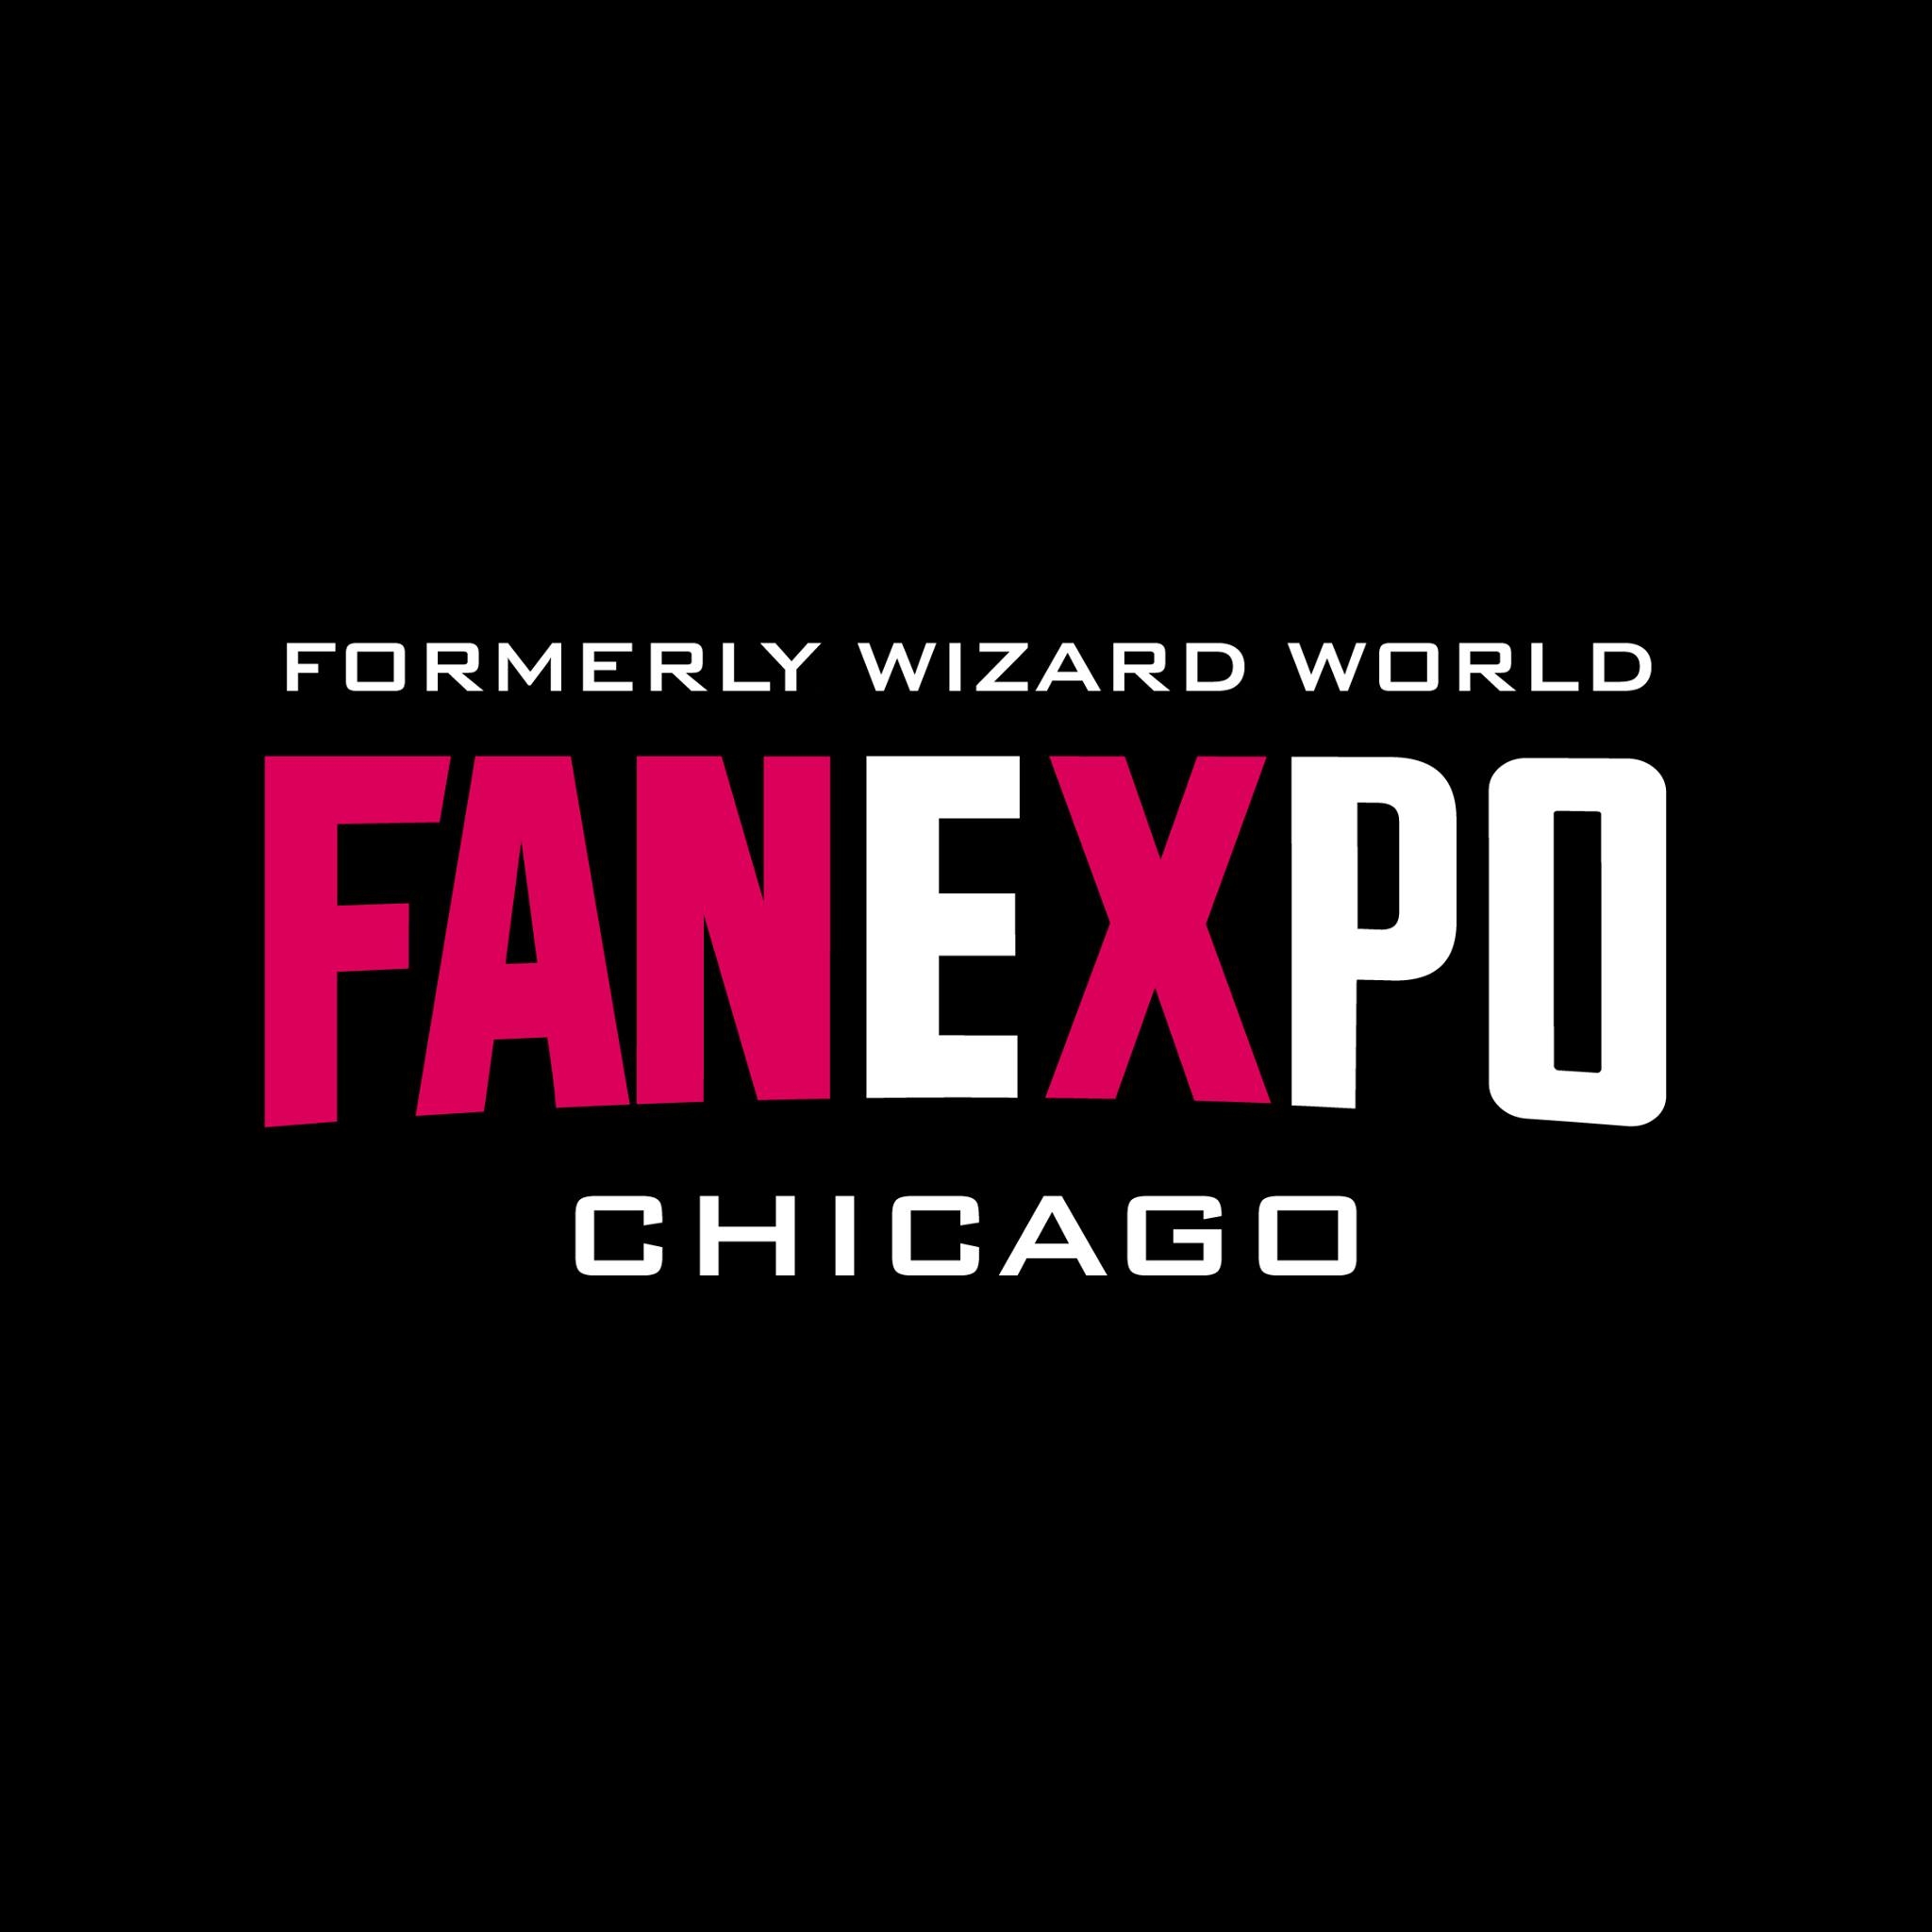 Fan Expo Chicago Makes Its Debut In The Windy City [Review] That